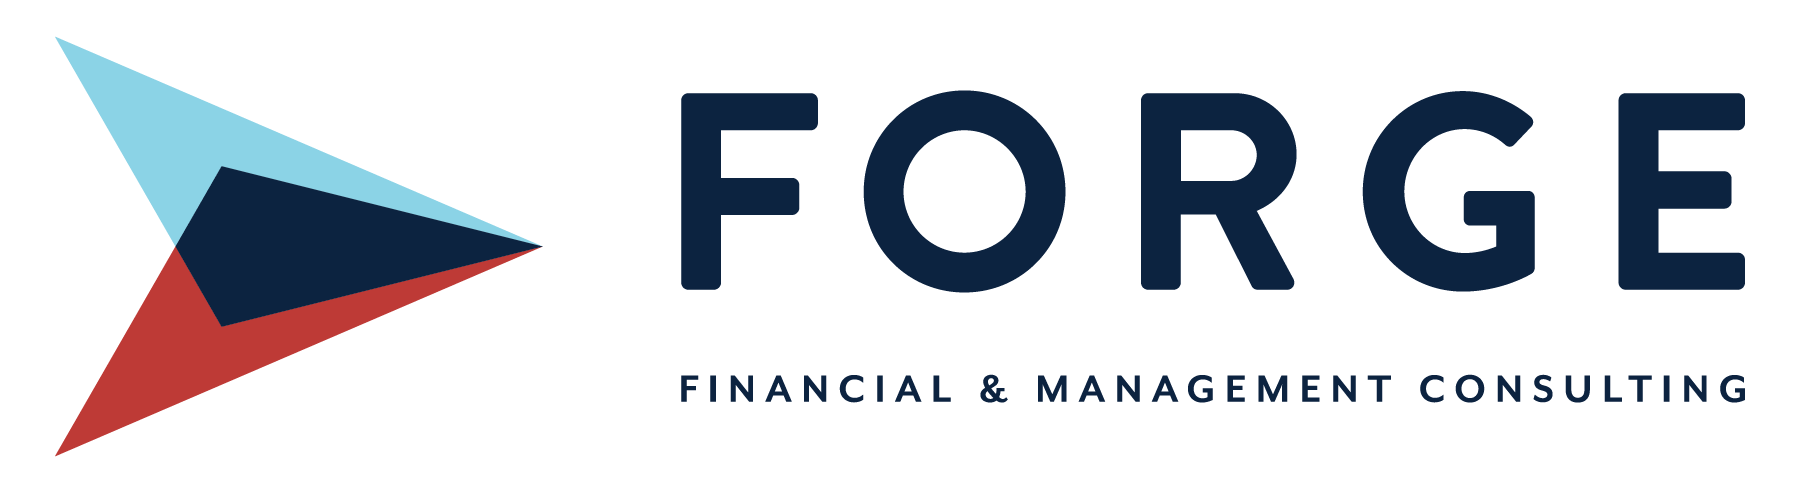 Forge Financial